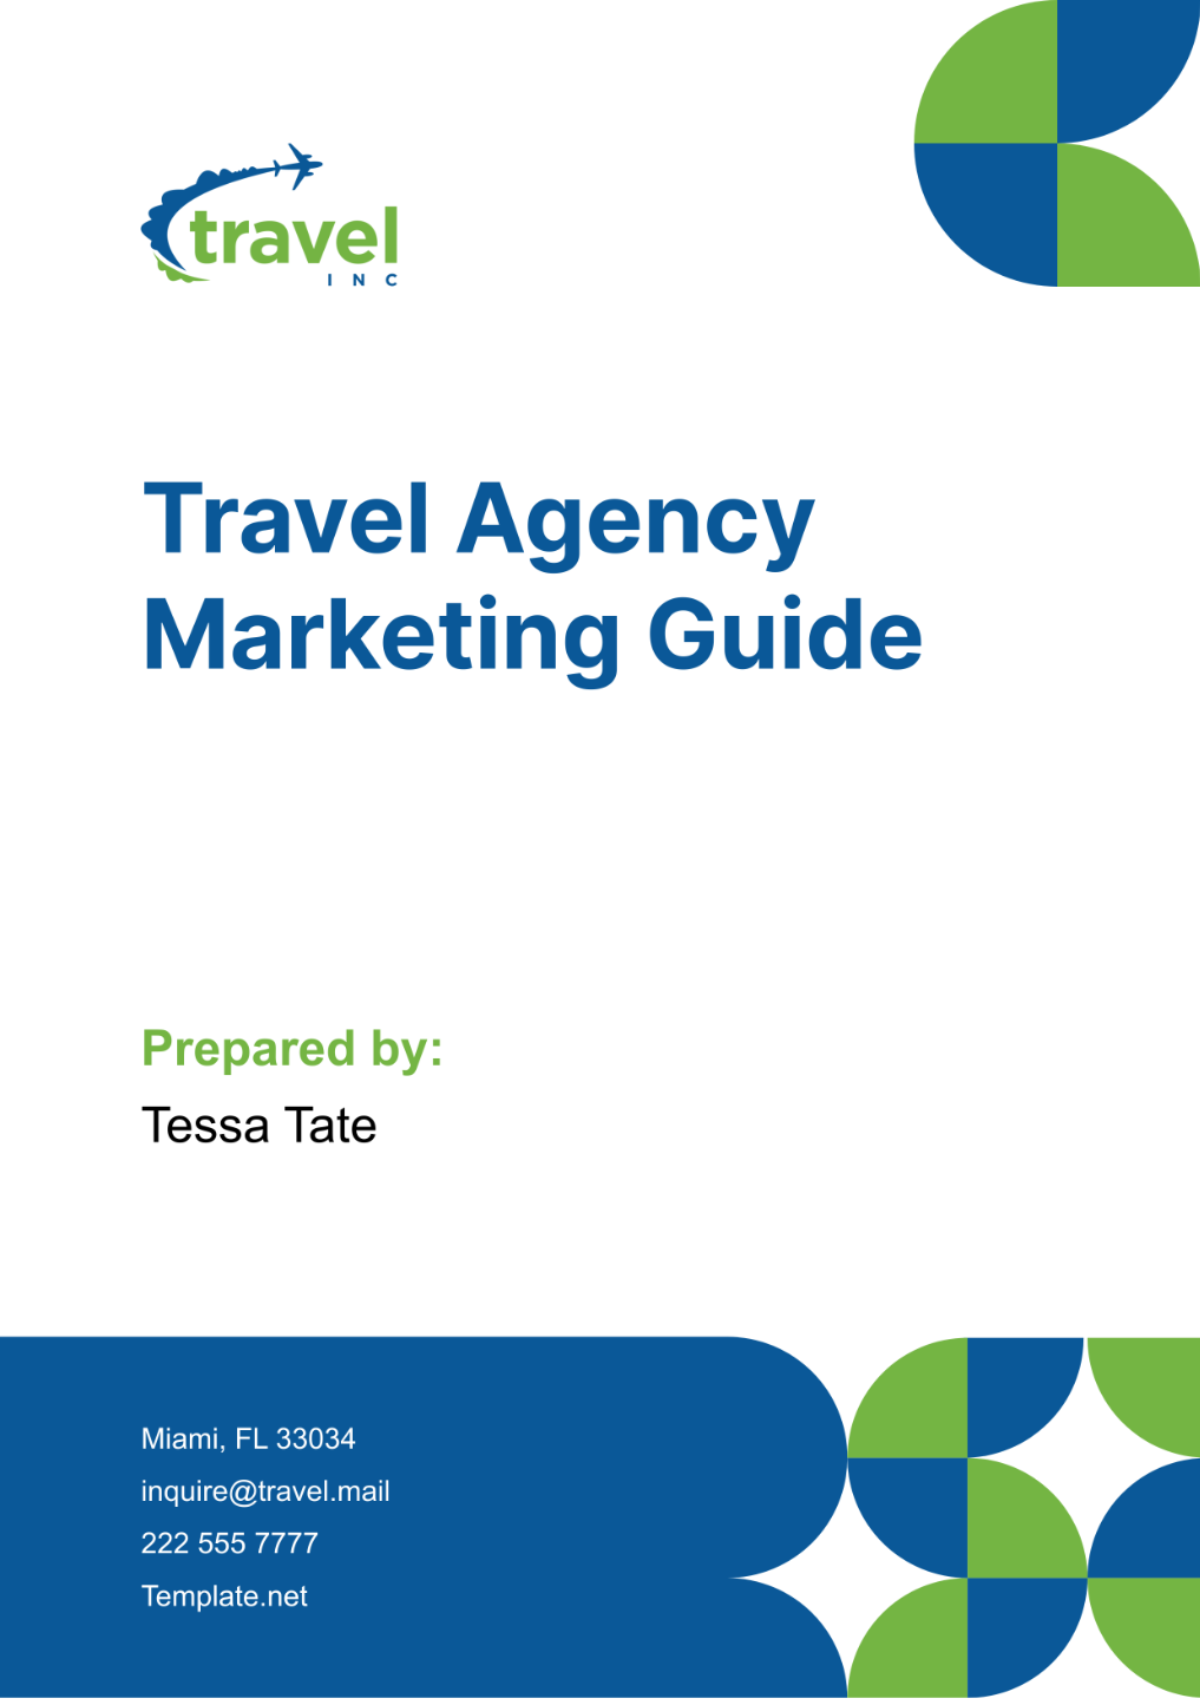 Travel Agency Marketing Guide Template